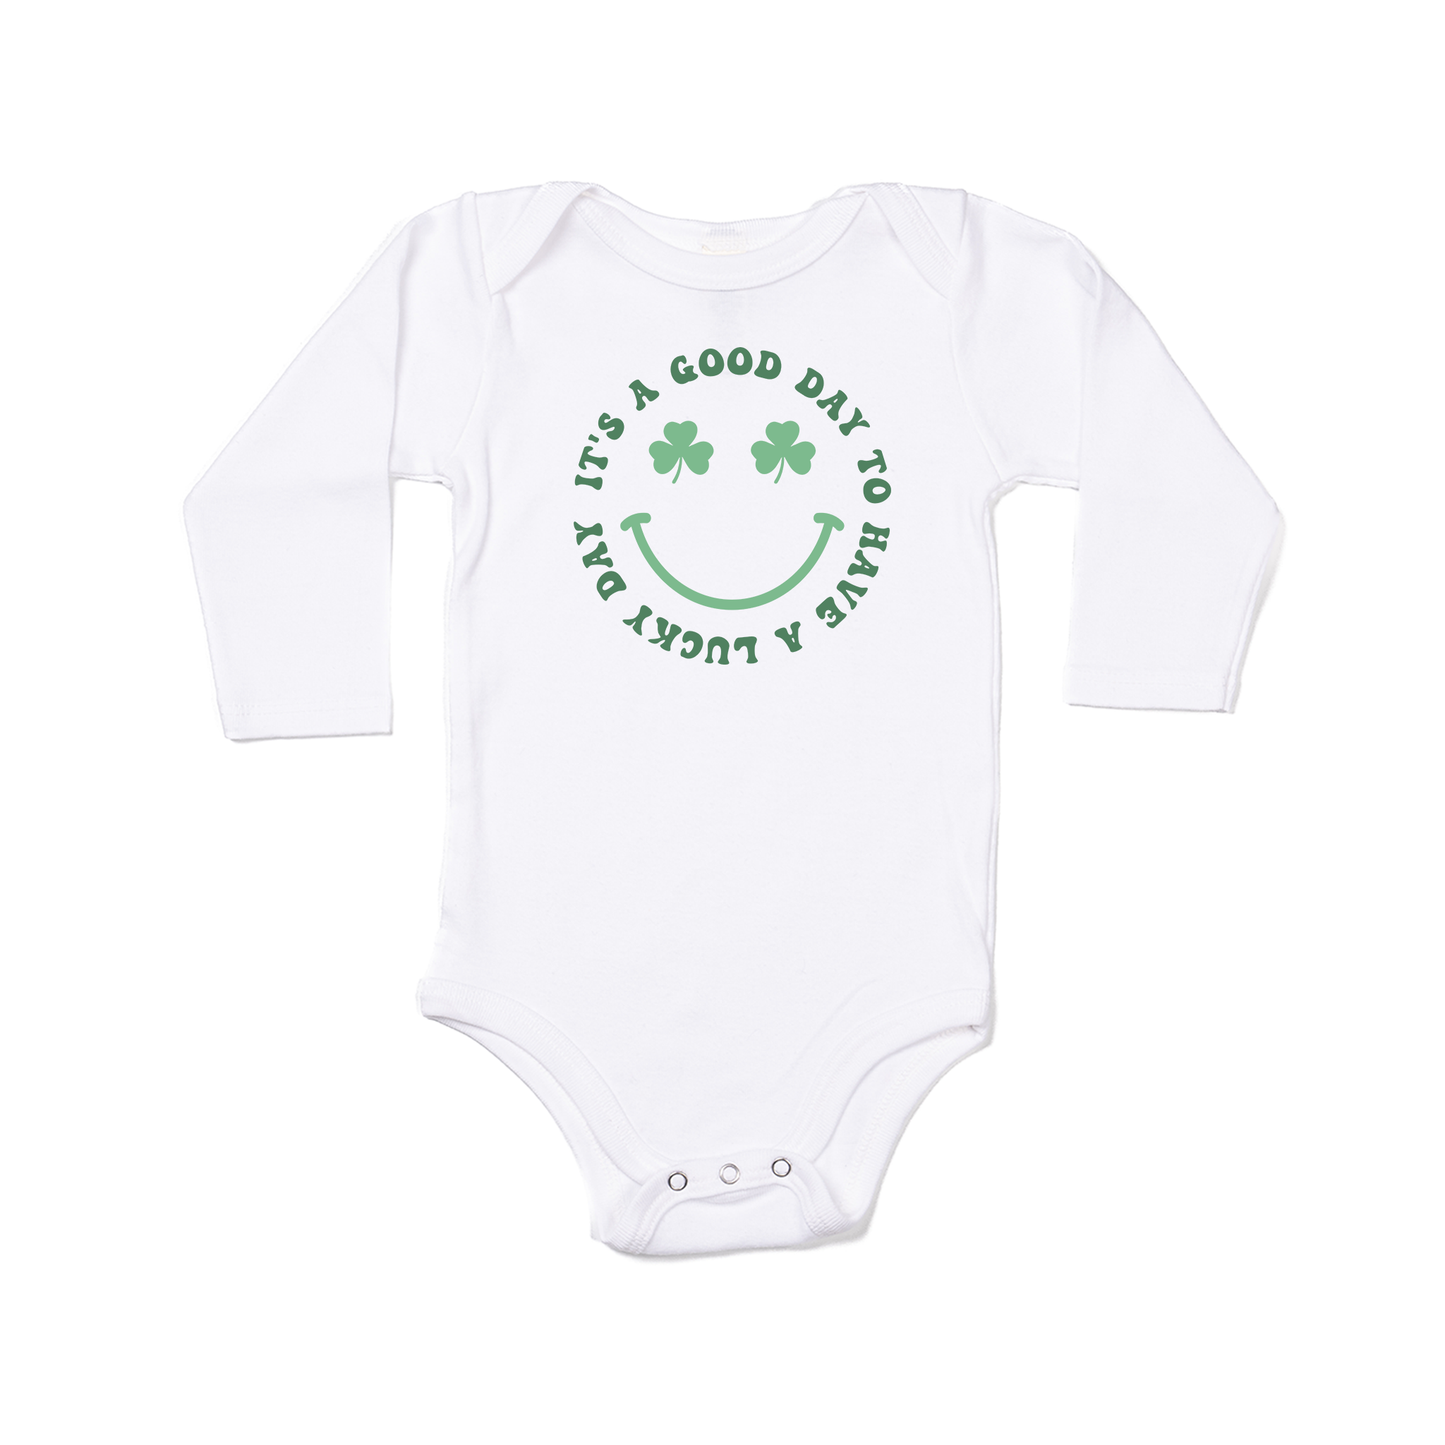 It's a good day to have a Lucky day (St. Patrick's) - Bodysuit (White, Long Sleeve)